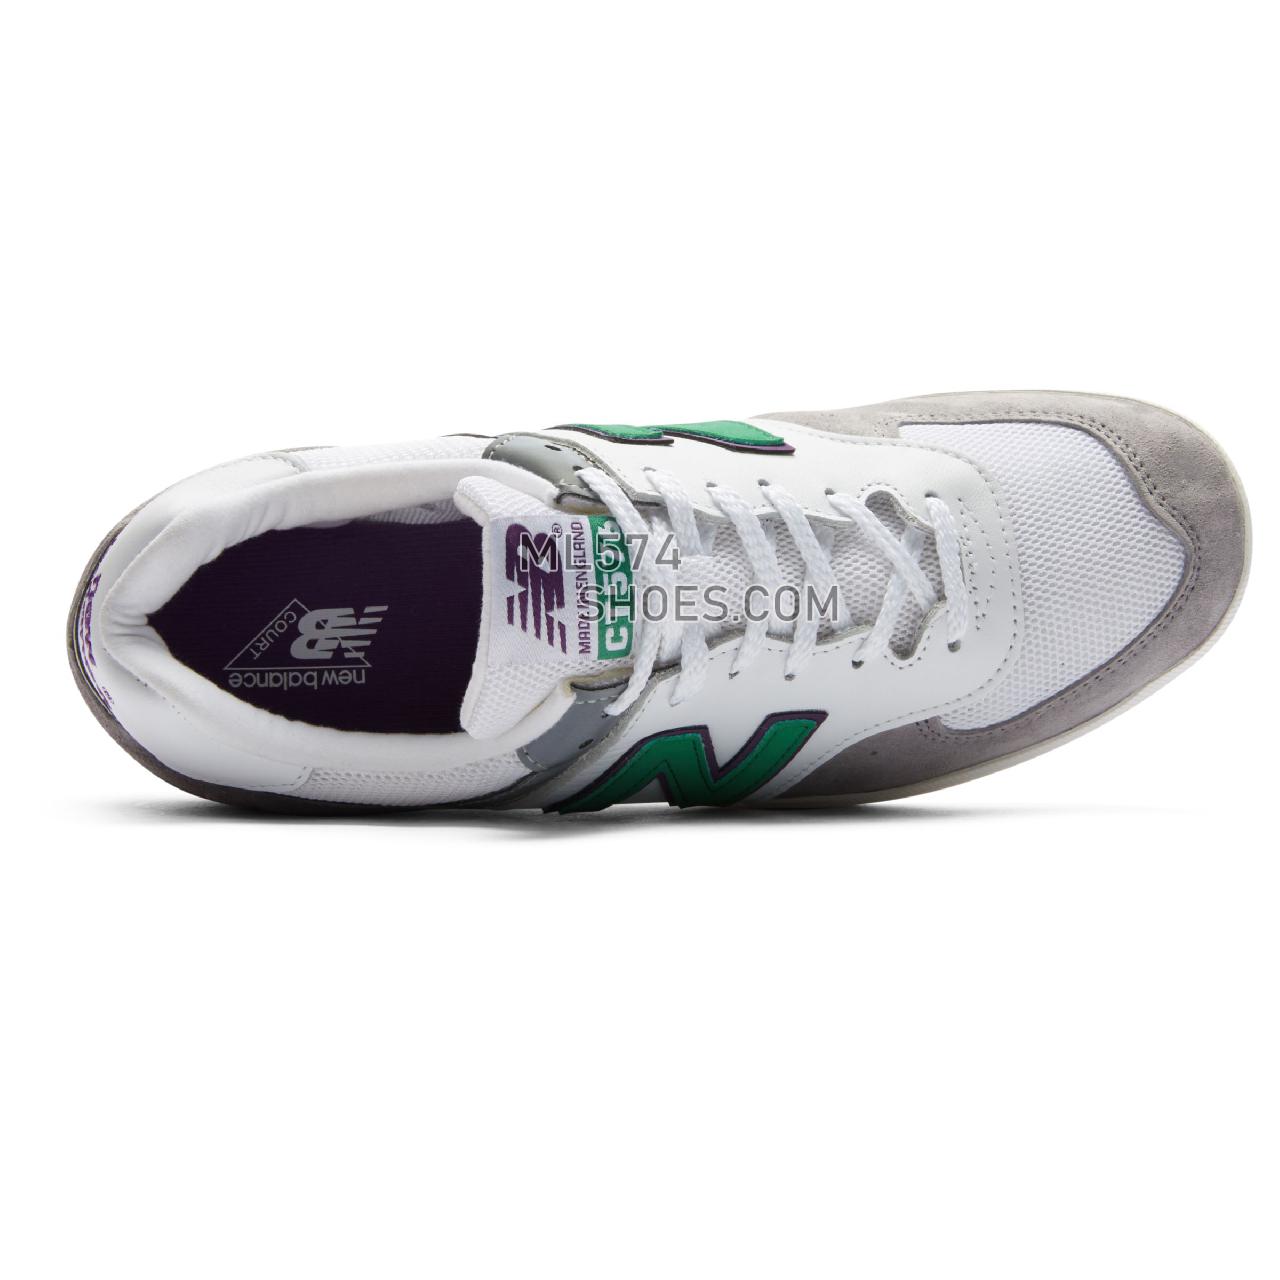 New Balance Made in UK 576 Racq Pacq - Men's Made in UK 576 Racq Pacq CT576V1-23755-M - White with Grey and Green - CT576CRT